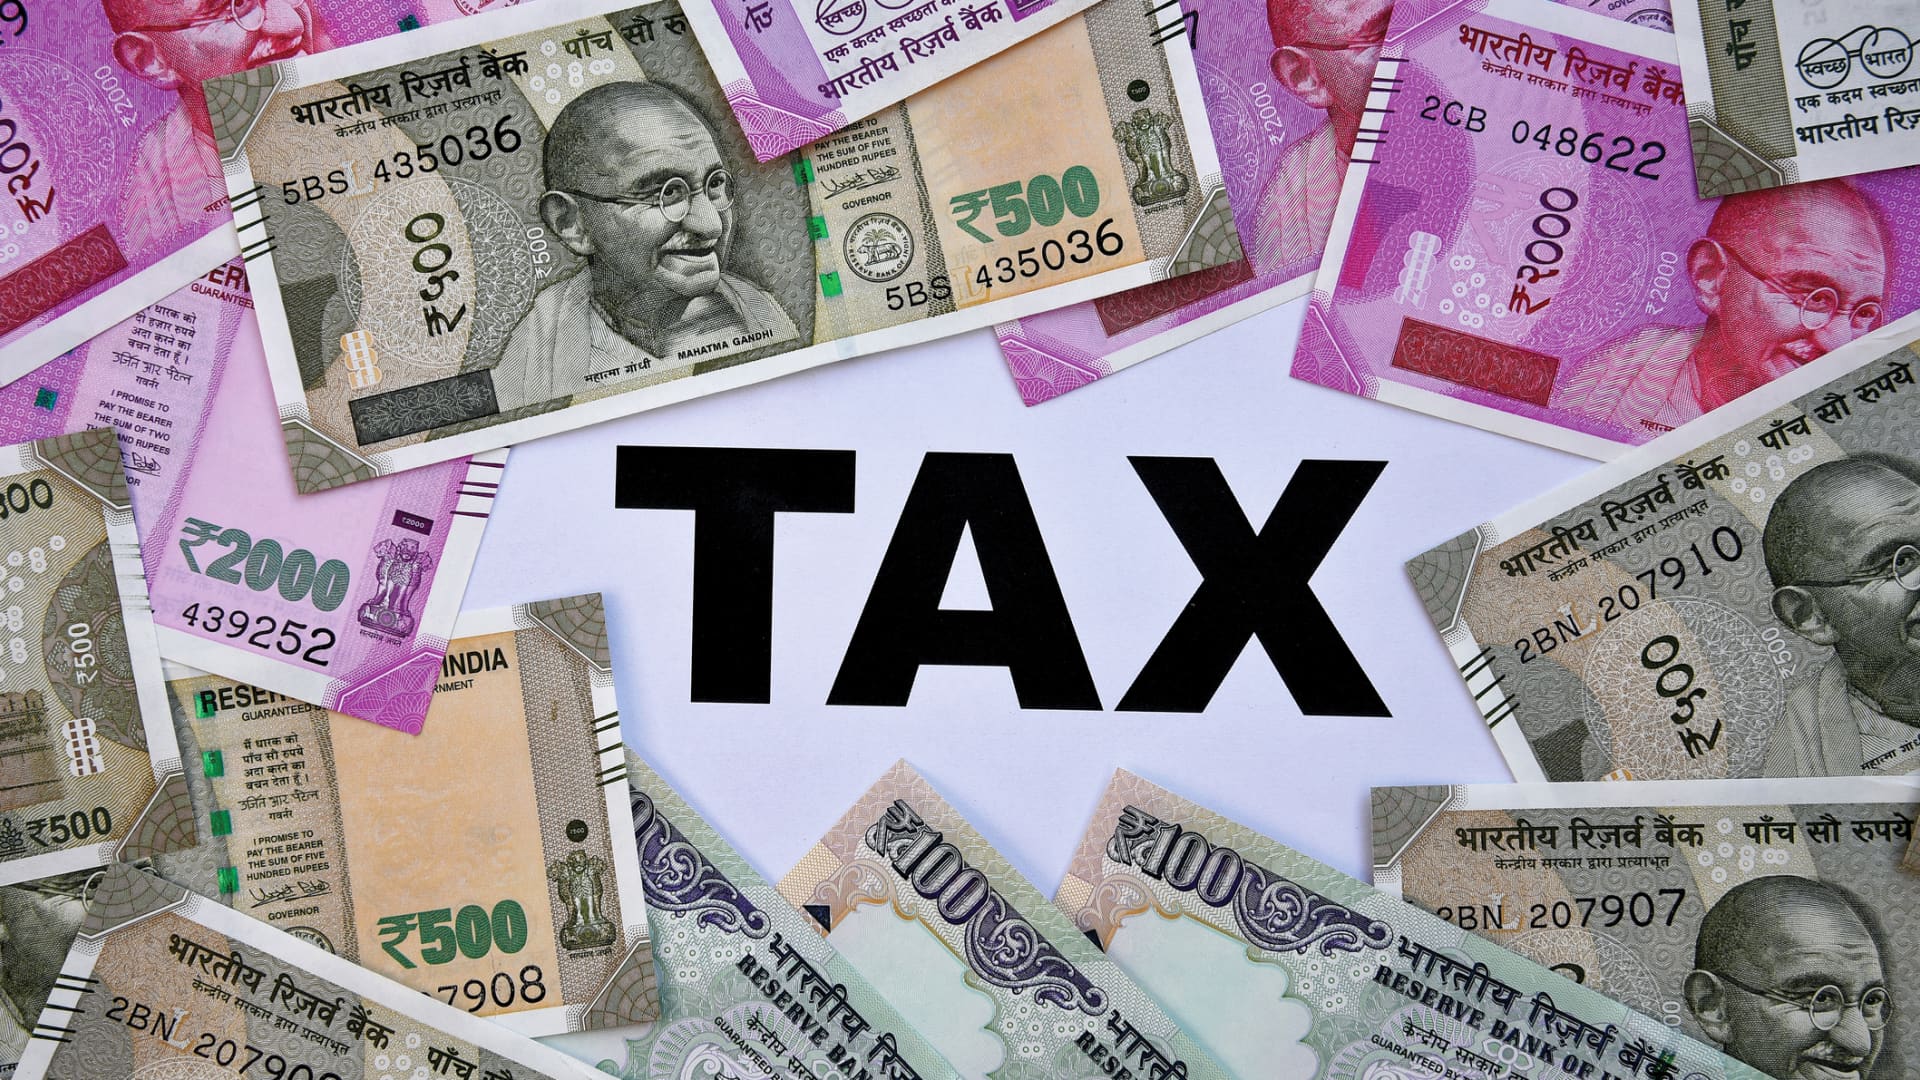 India’s bold tax reforms 5 years on: Why it may be too soon to celebrate